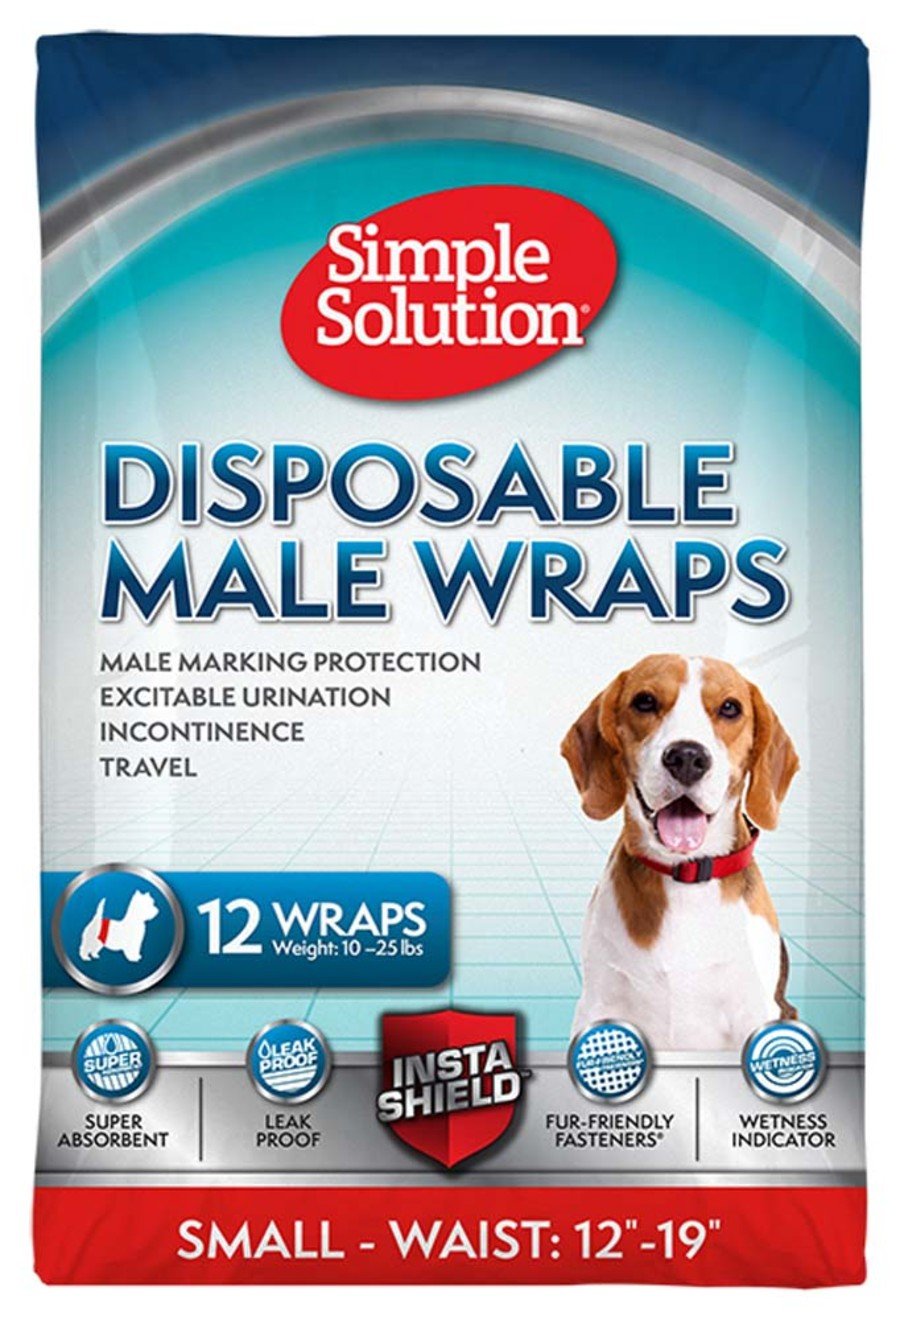 Simple Solution Disposable Male Wraps White, MD, 12 pk, Simple Solution